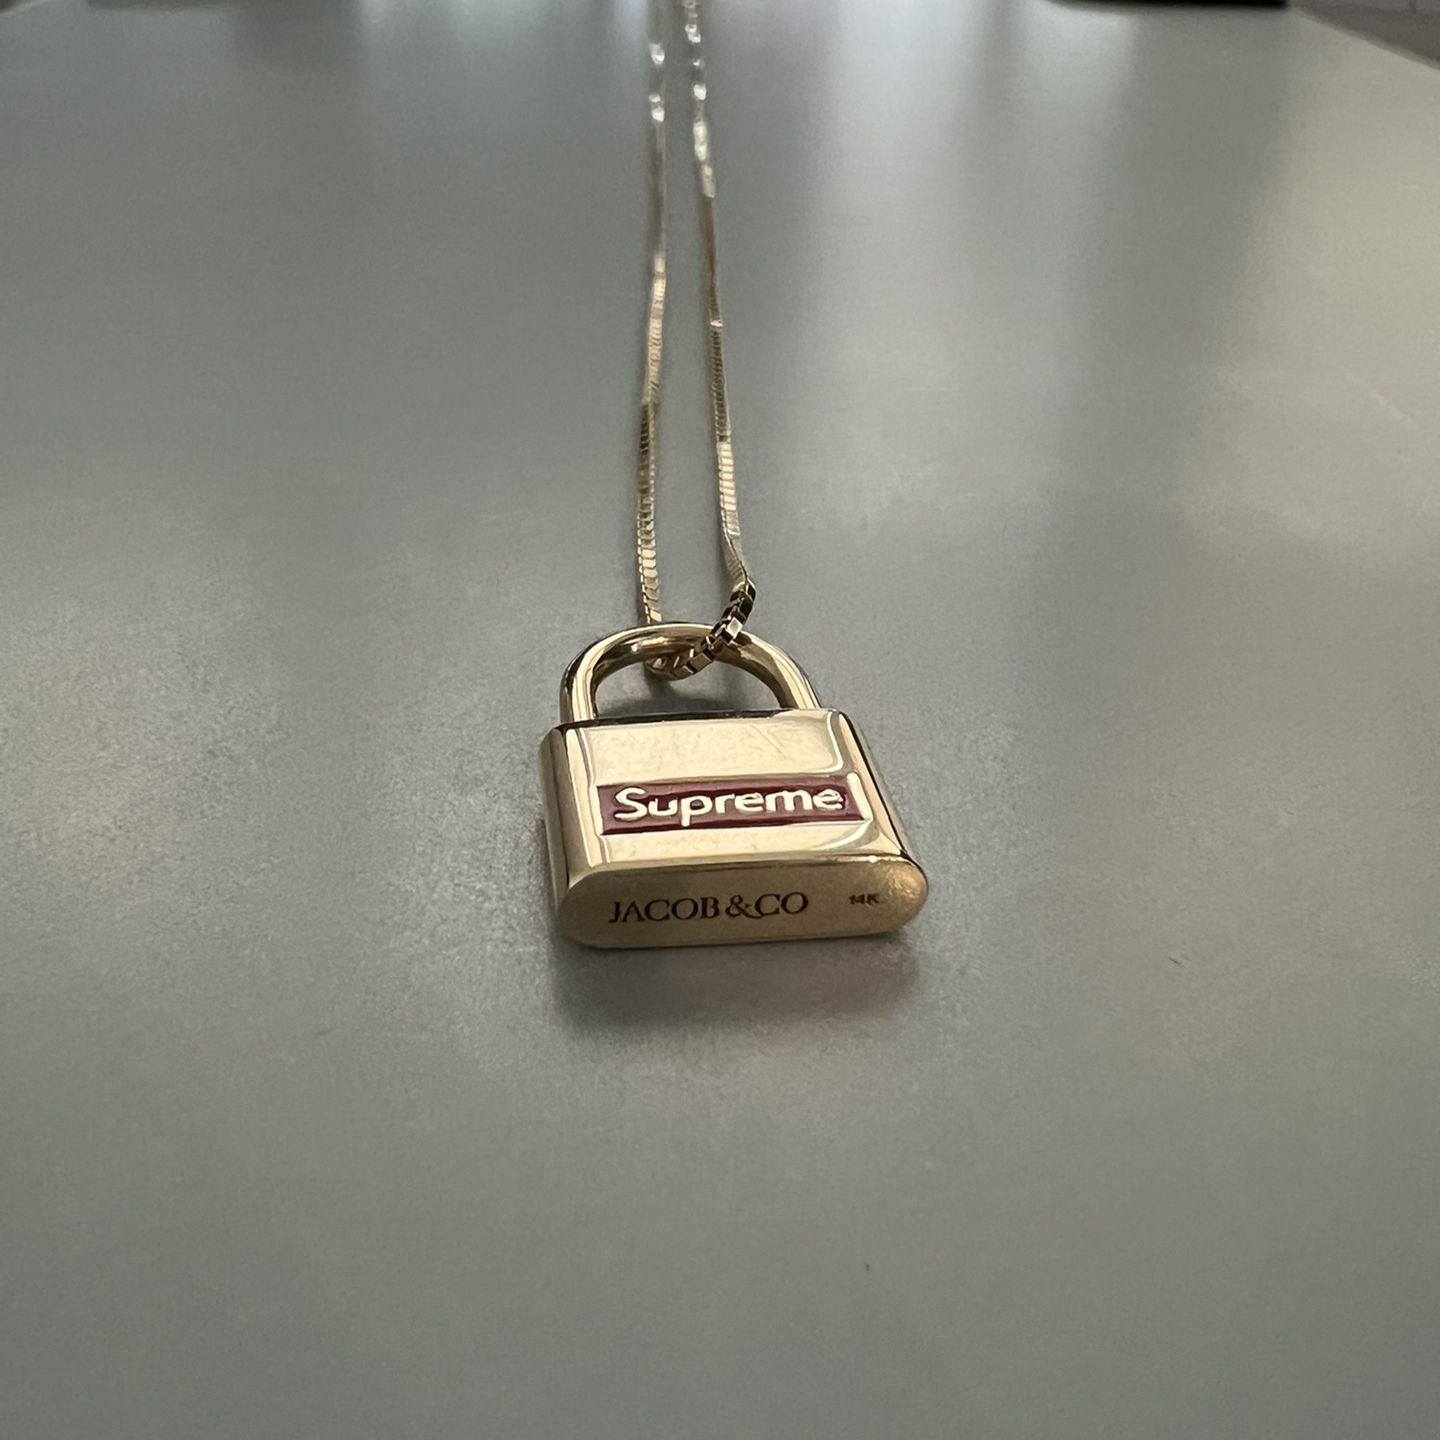 Supreme Jacob & Co. 14k Gold Lock Pendant for Sale in Portland, OR - OfferUp